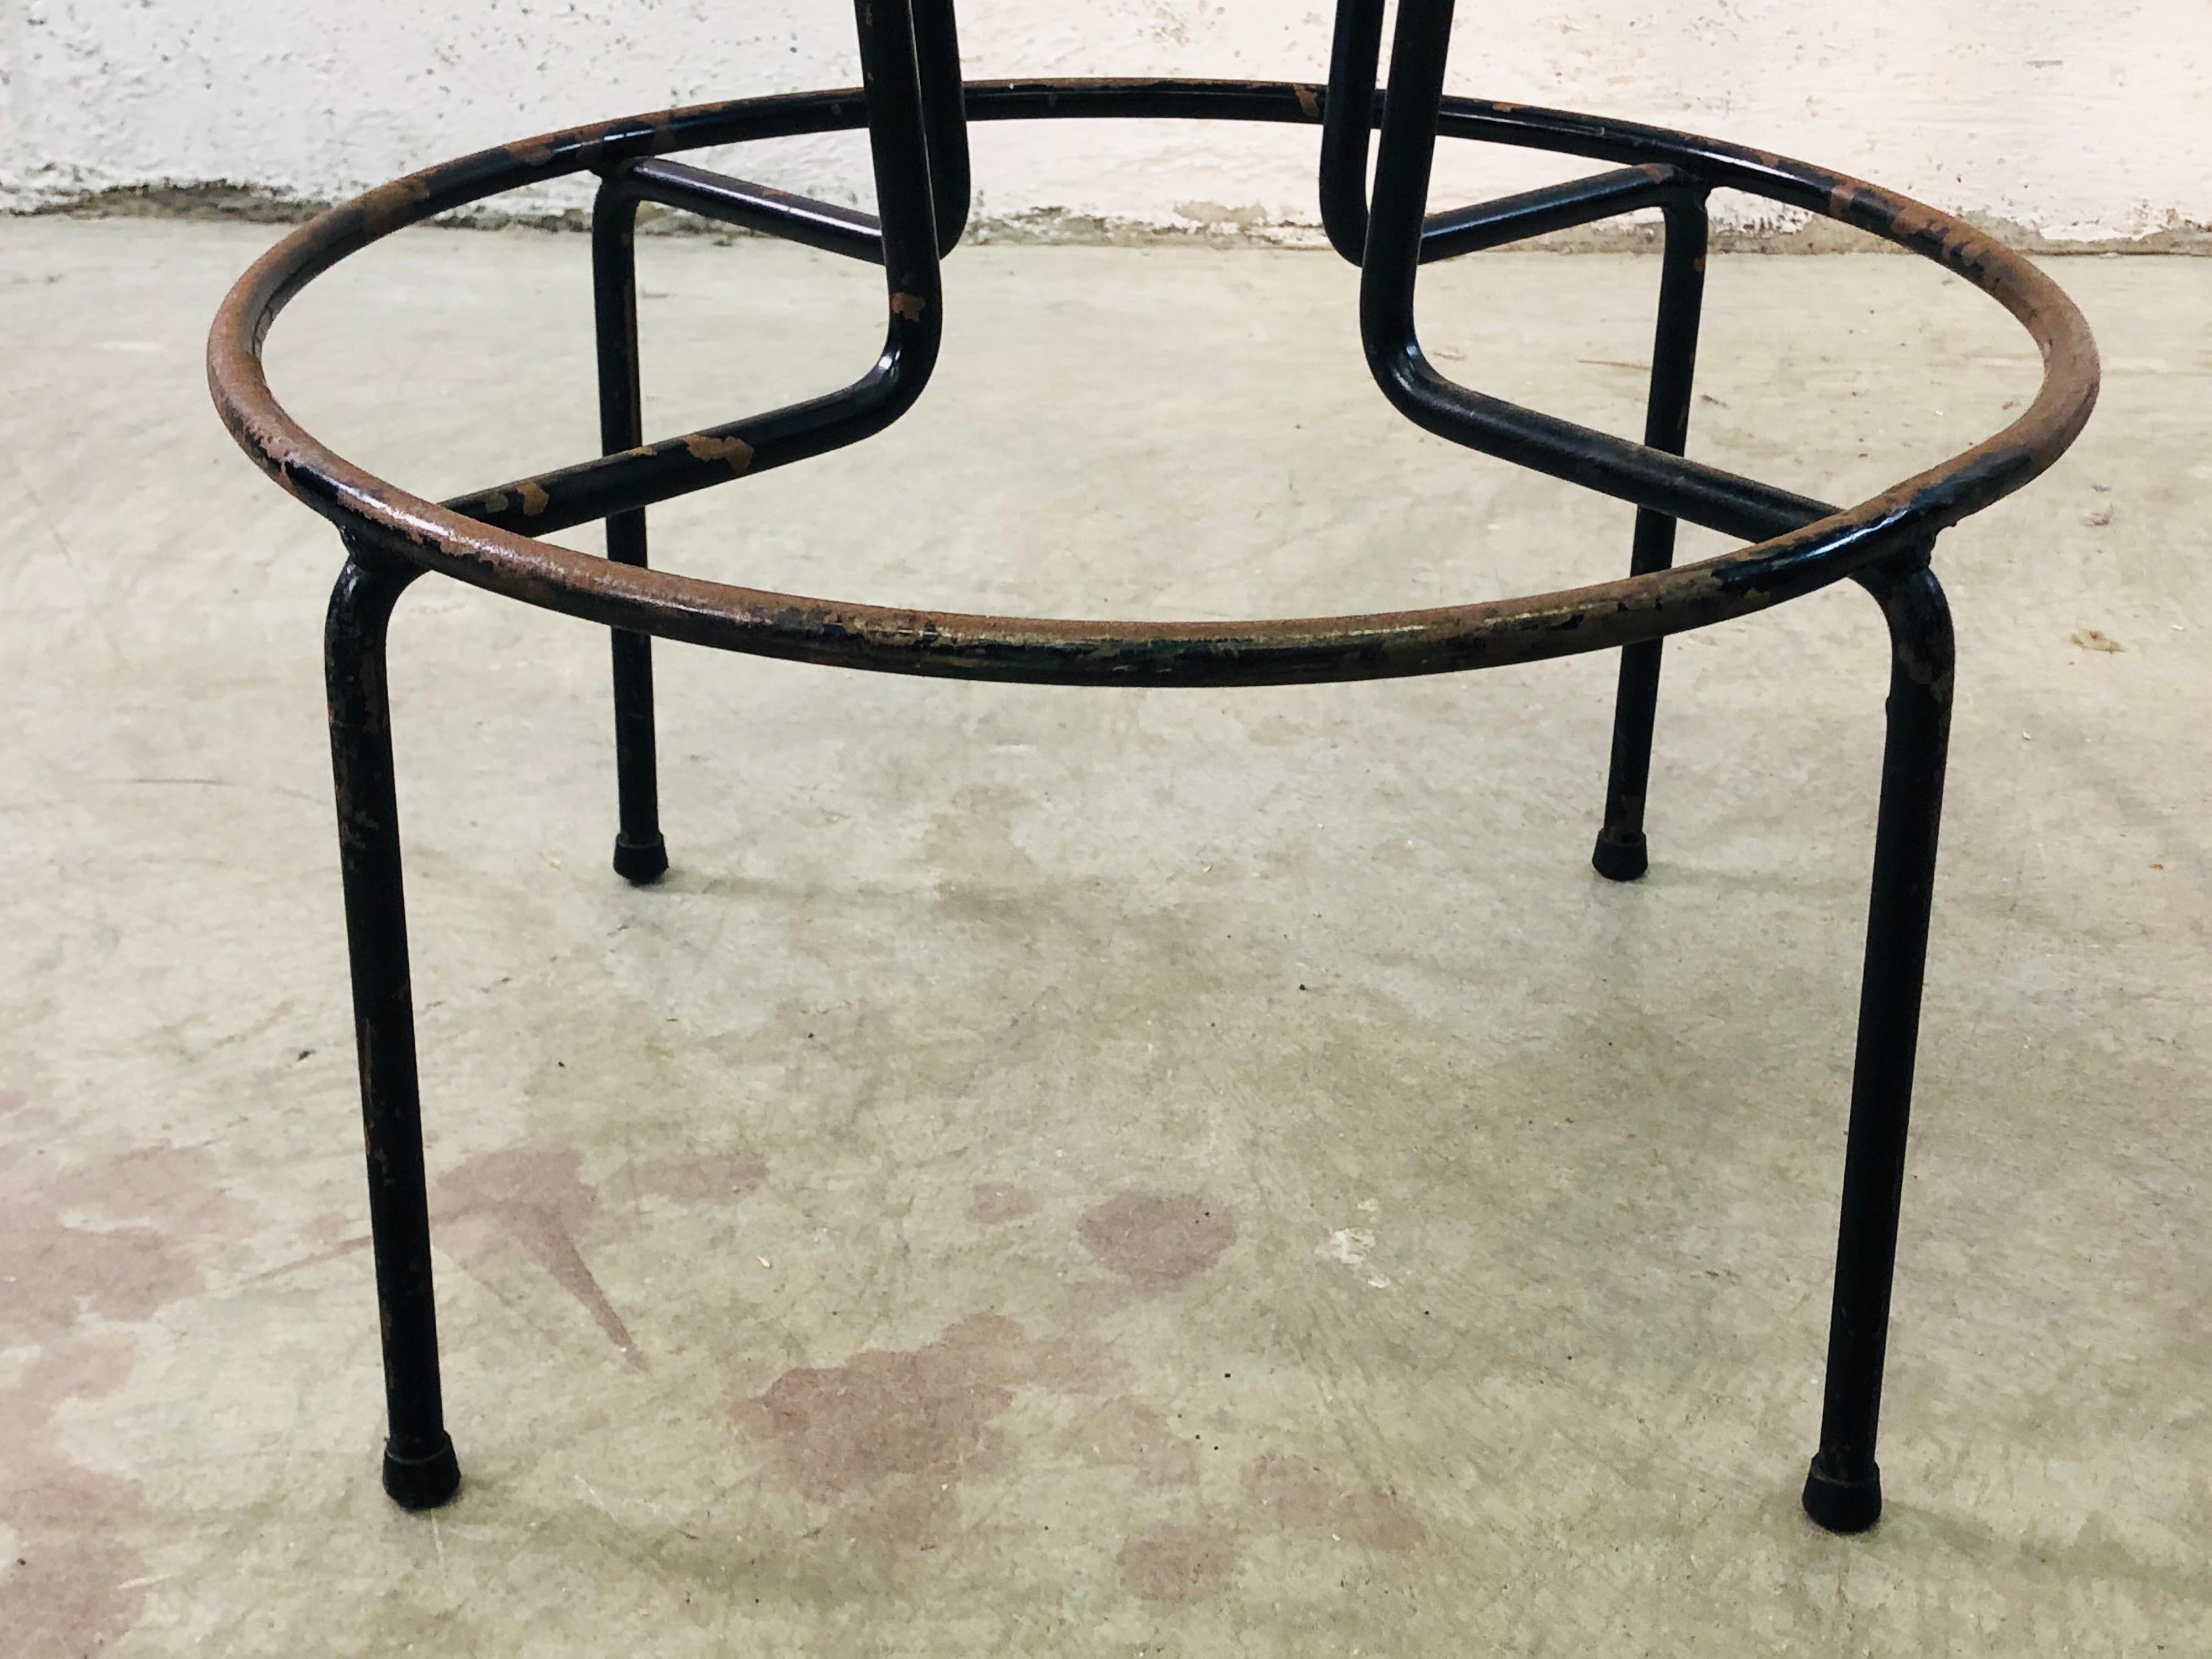 American Vintage Frederick Weinberg Wrought Iron Bar Stools, Pair For Sale